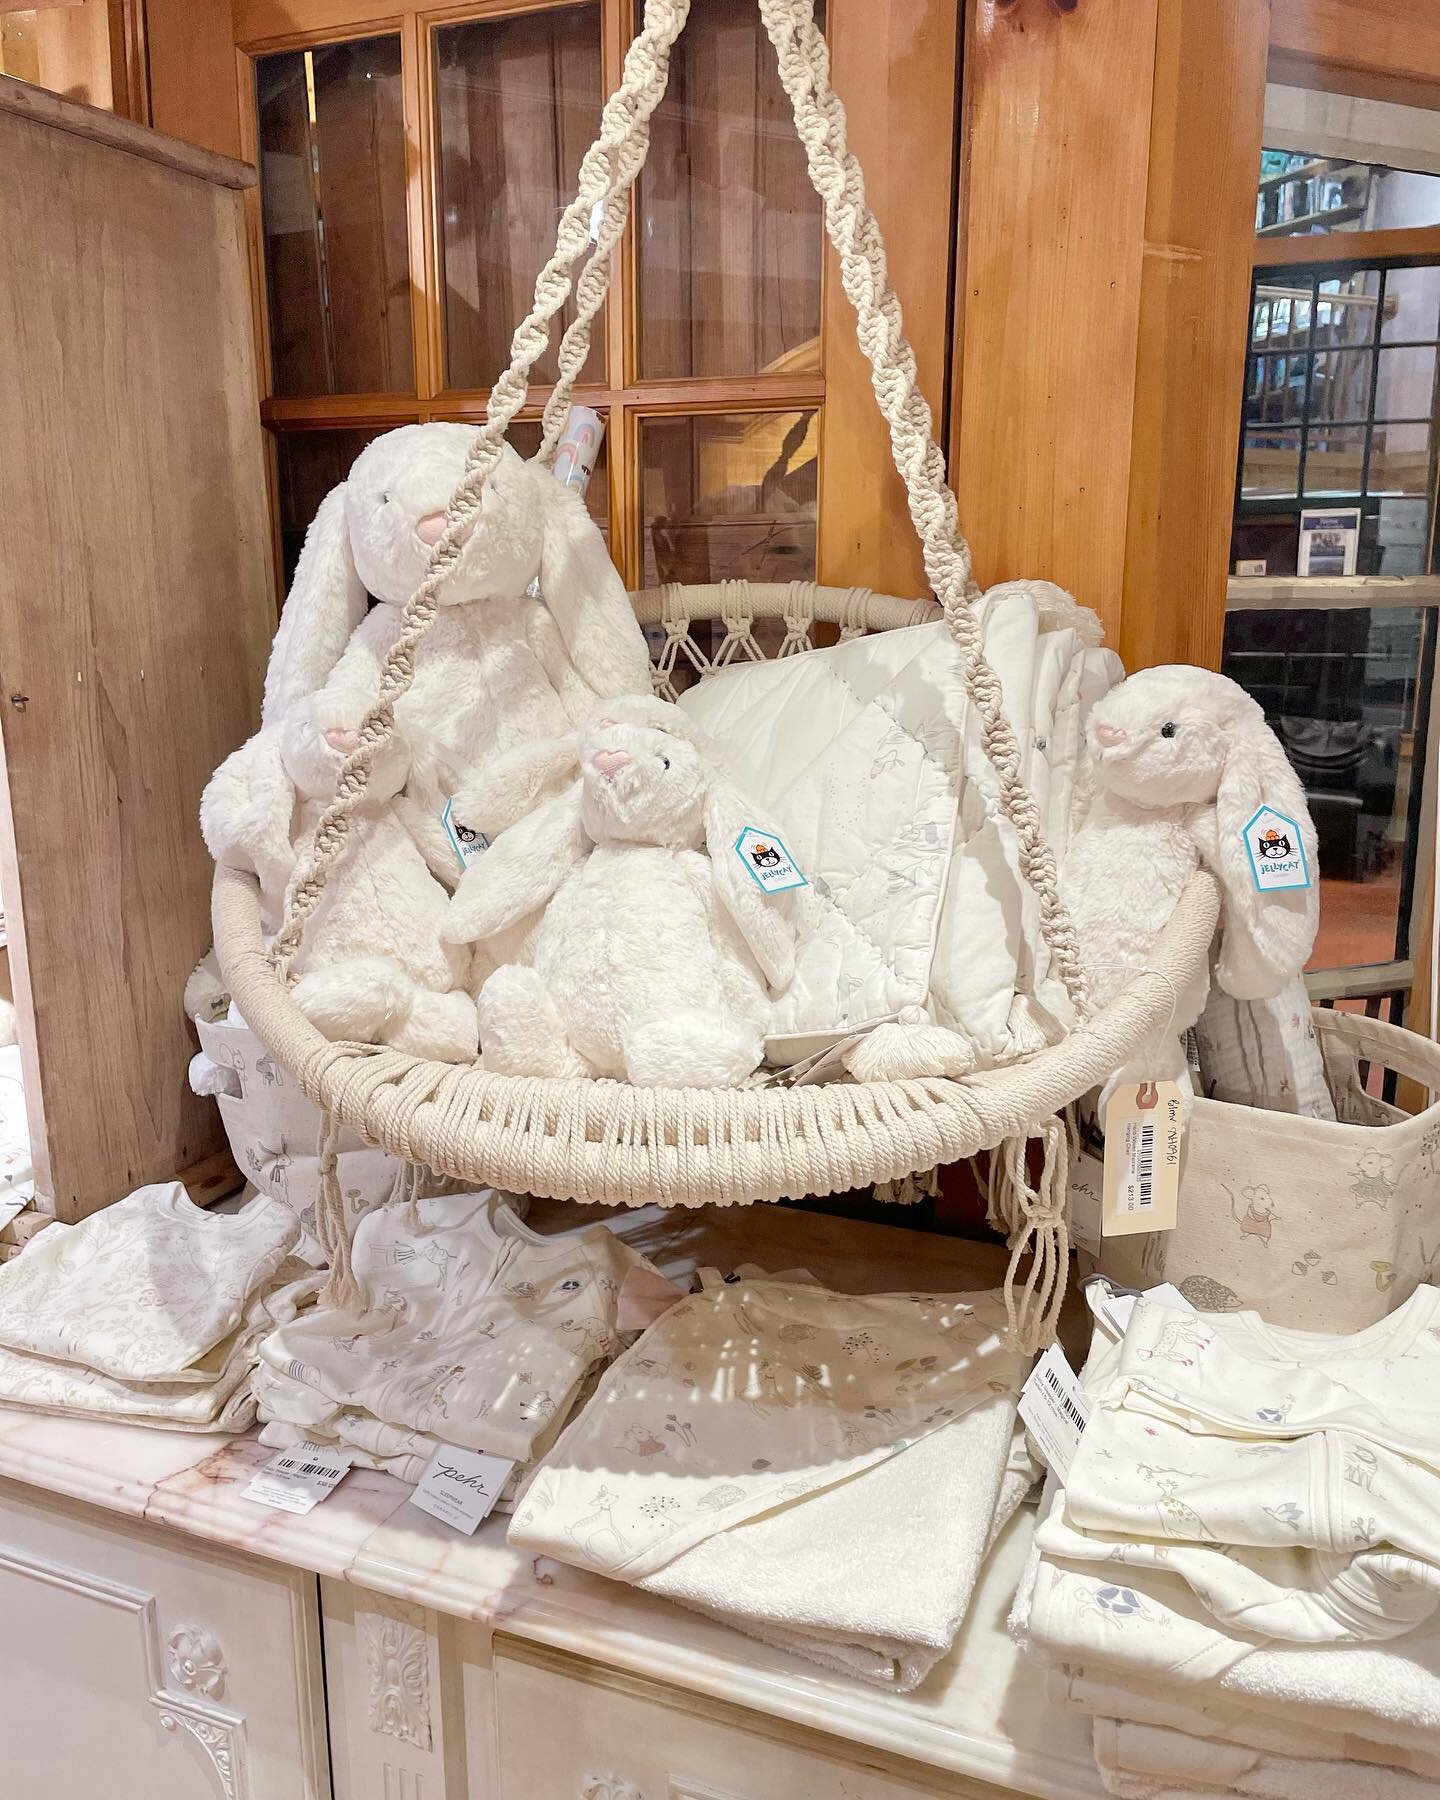 On the hunt for the softest, cuddliest, most adorable baby shower gift? @wishbasket has you covered (and soft and cuddly things for you too!)